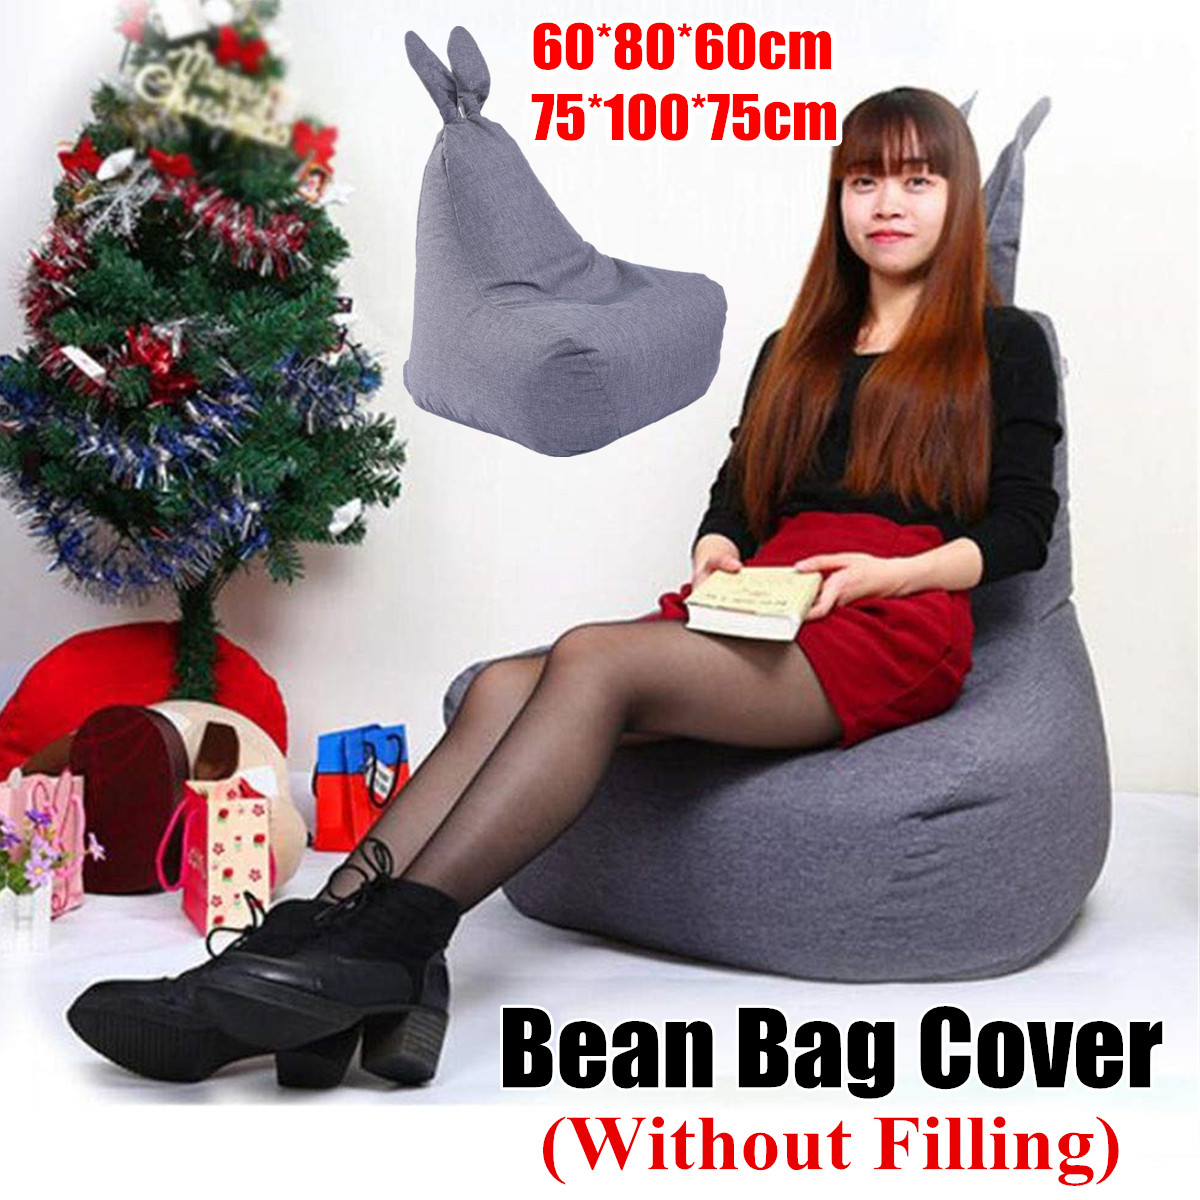 Rabbit-Shape-Bean-Bag-Chair-Seat-Sofa-Cover-For-Adults-Kids-Without-Filling-Home-Room-1566395-1